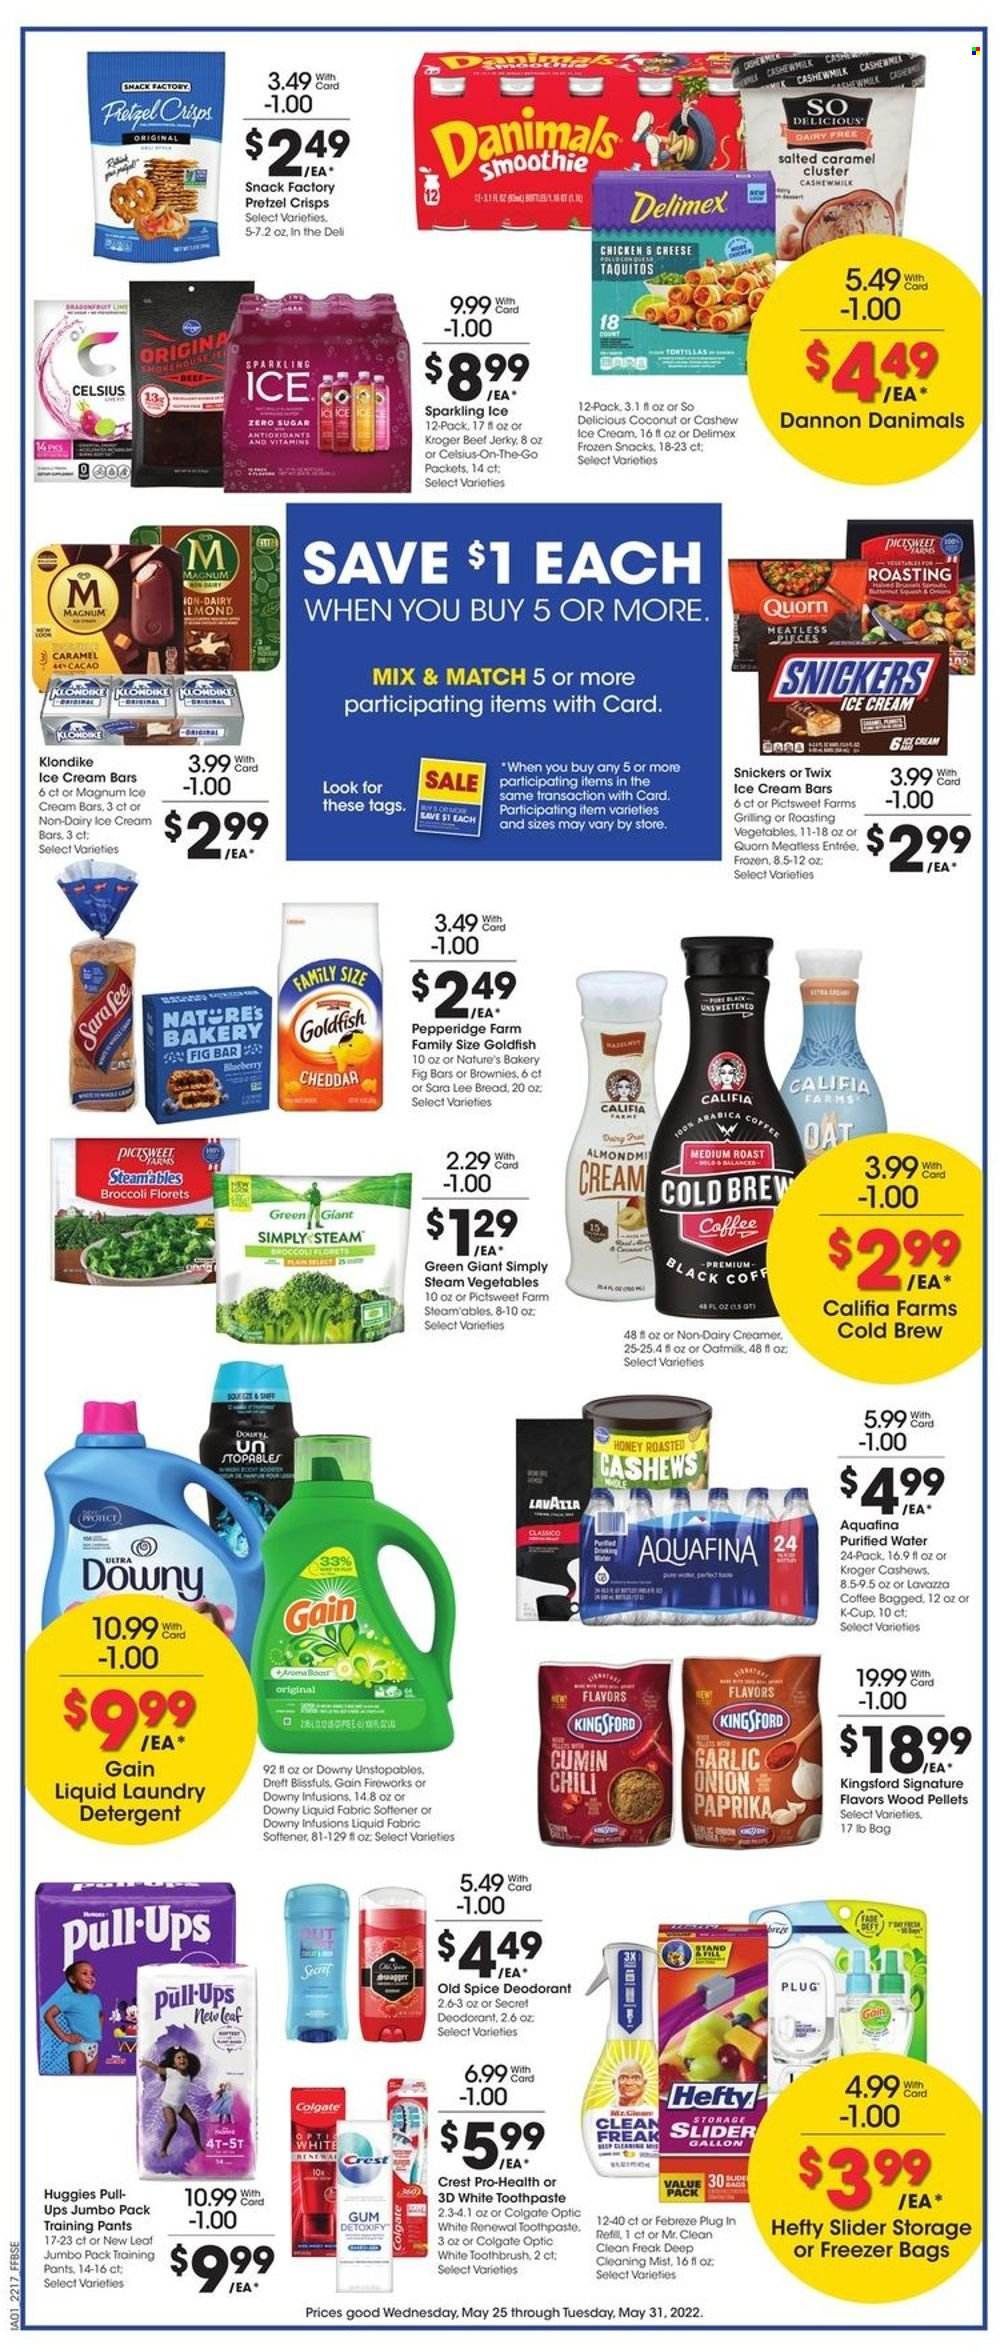 thumbnail - Fry’s Flyer - 05/25/2022 - 05/31/2022 - Sales products - Sara Lee, broccoli, garlic, onion, coconut, taquitos, beef jerky, jerky, Dannon, Danimals, oat milk, non dairy creamer, creamer, ice cream, ice cream bars, snack, Snickers, Twix, Goldfish, pretzel crisps, oats, spice, cumin, honey, cashews, Aquafina, purified water, Boost, coffee, coffee capsules, K-Cups, Lavazza, Huggies, pants, baby pants, detergent, Febreze, Gain, Unstopables, fabric softener, laundry detergent, Gain Fireworks, Downy Laundry, Old Spice, Colgate, toothbrush, toothpaste, Crest, anti-perspirant, deodorant, Hefty, gallon, freezer bag, freezer. Page 4.